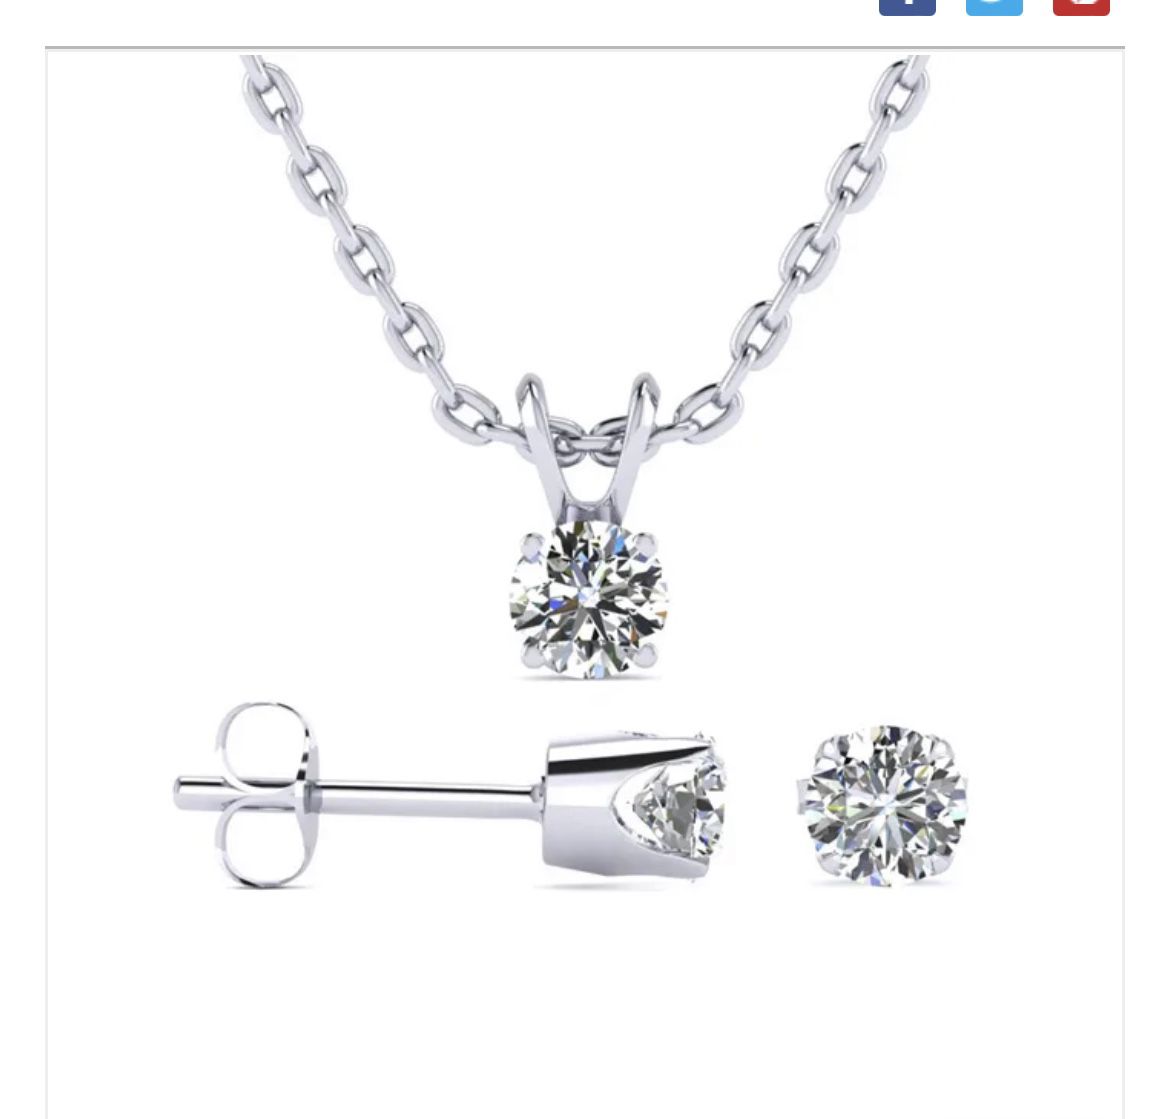 Beautiful natural diamond necklace and earrings set. On sterling silver